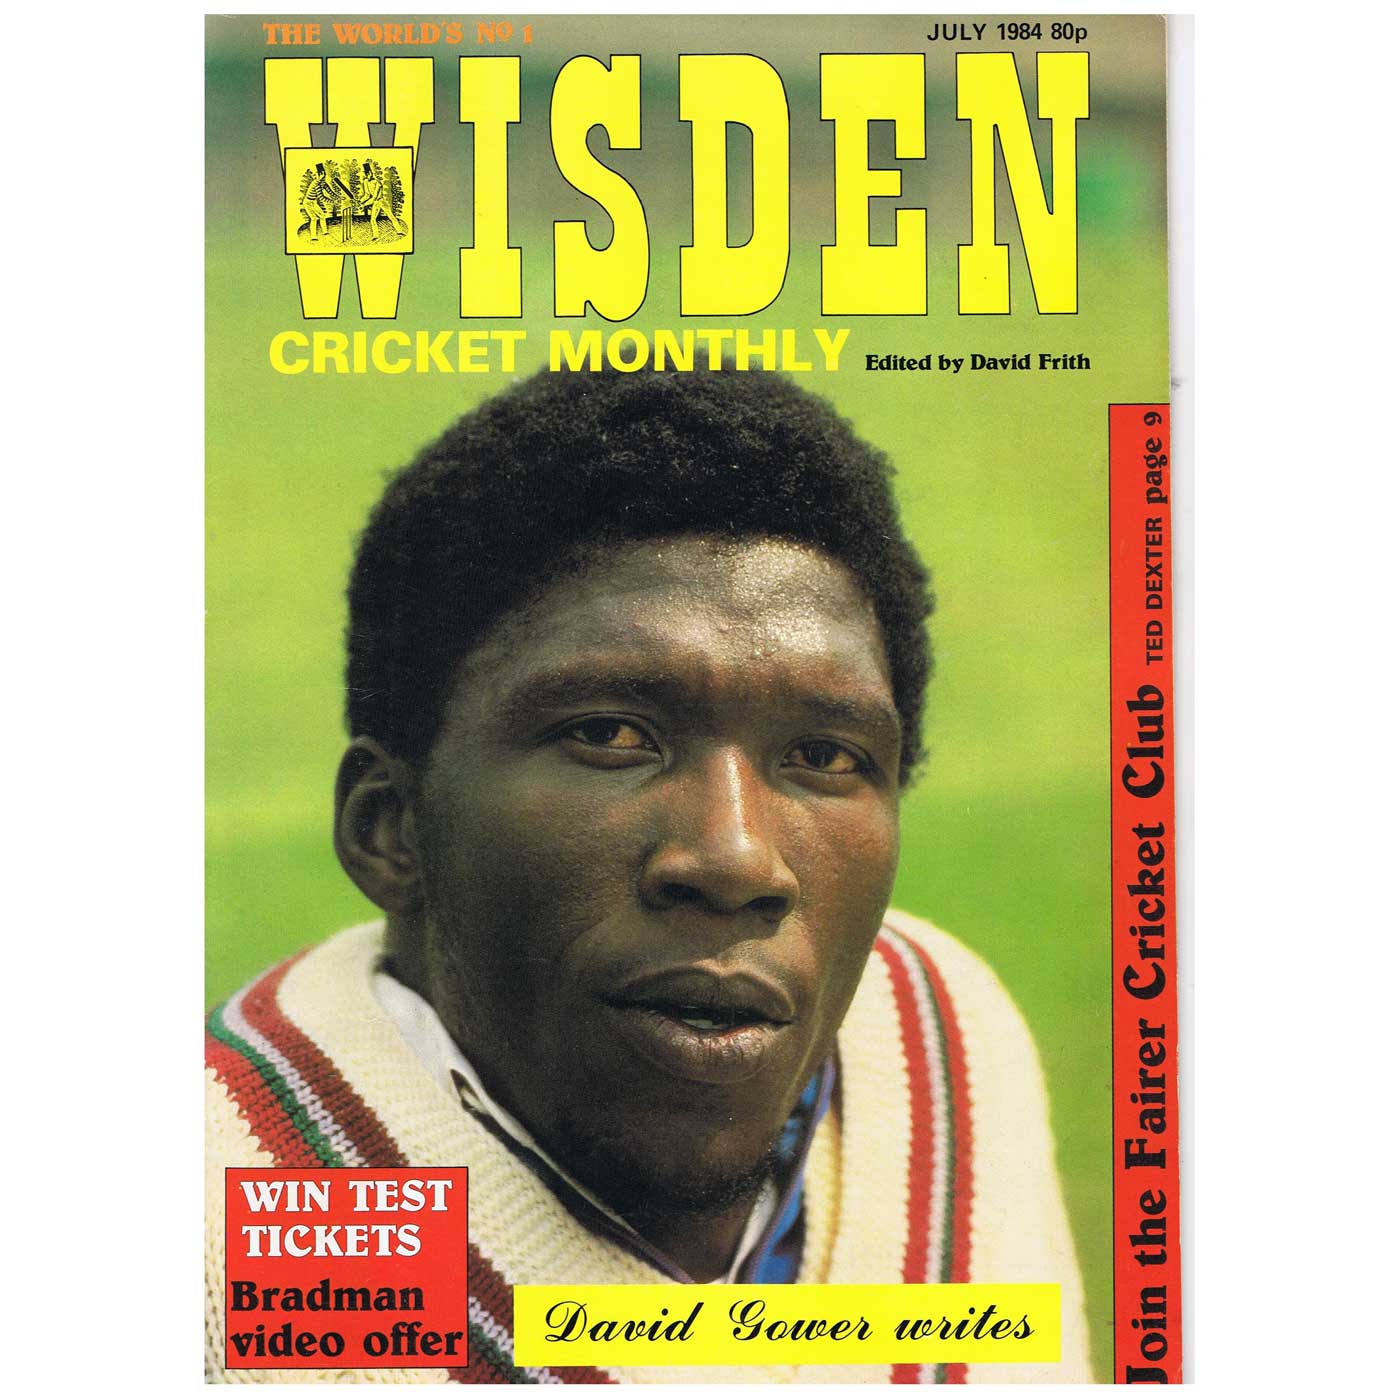 Wisden Cricket Monthly - an original edition from July 1984